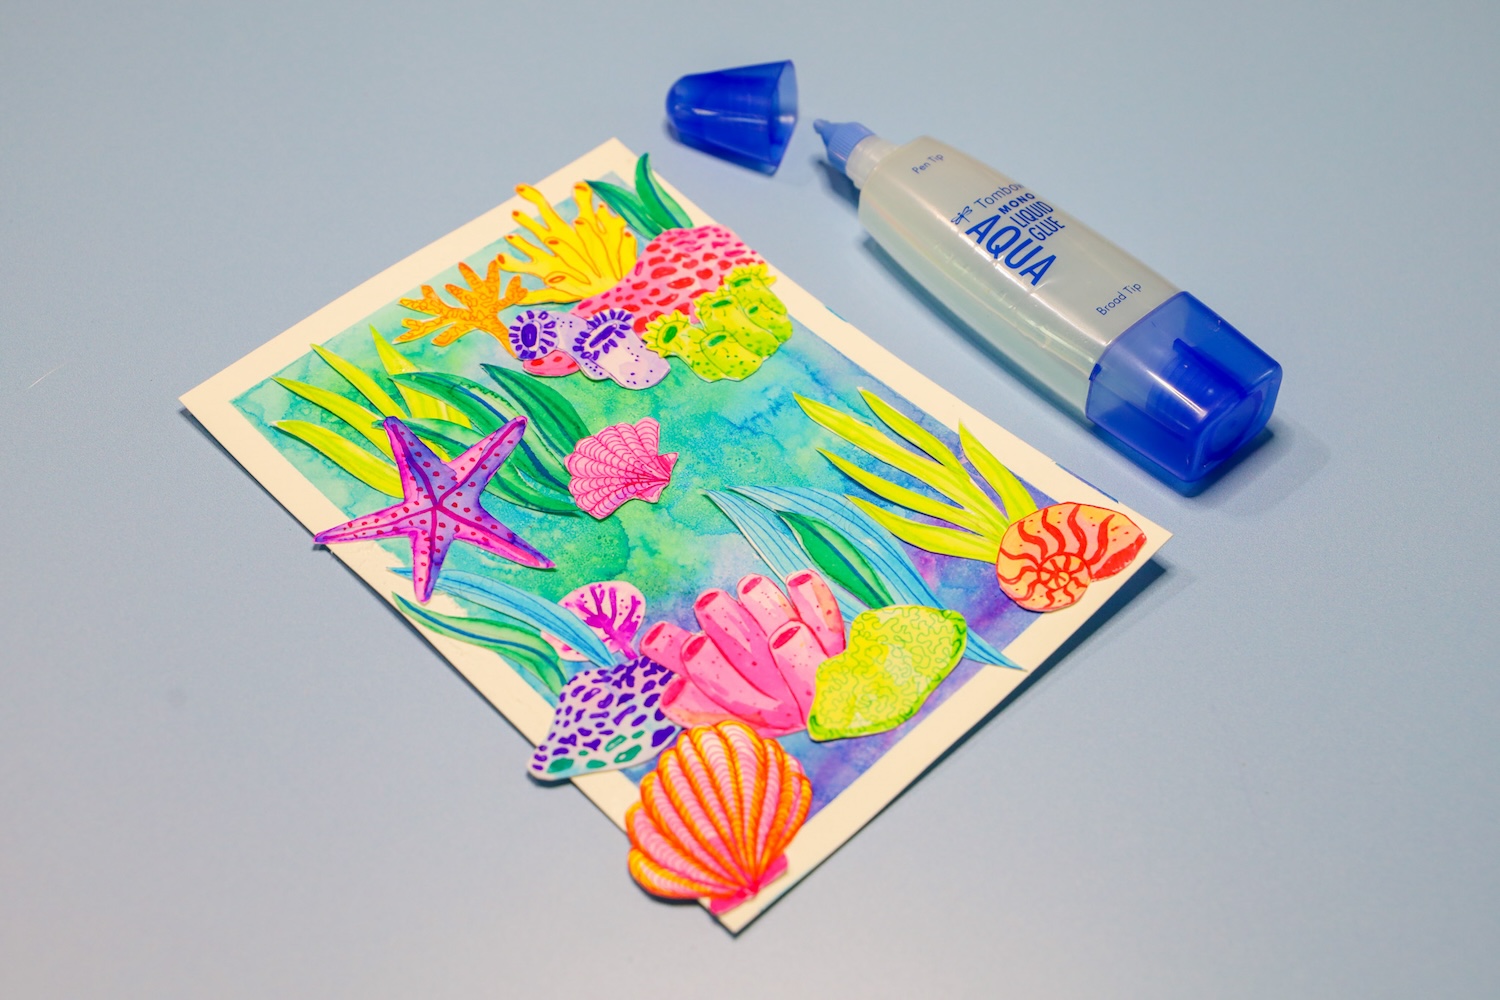 Learn how to make your own DIY Ocean Collage Art using @tombowusa Dual Brush Pens following this tutorial by @studio.katie